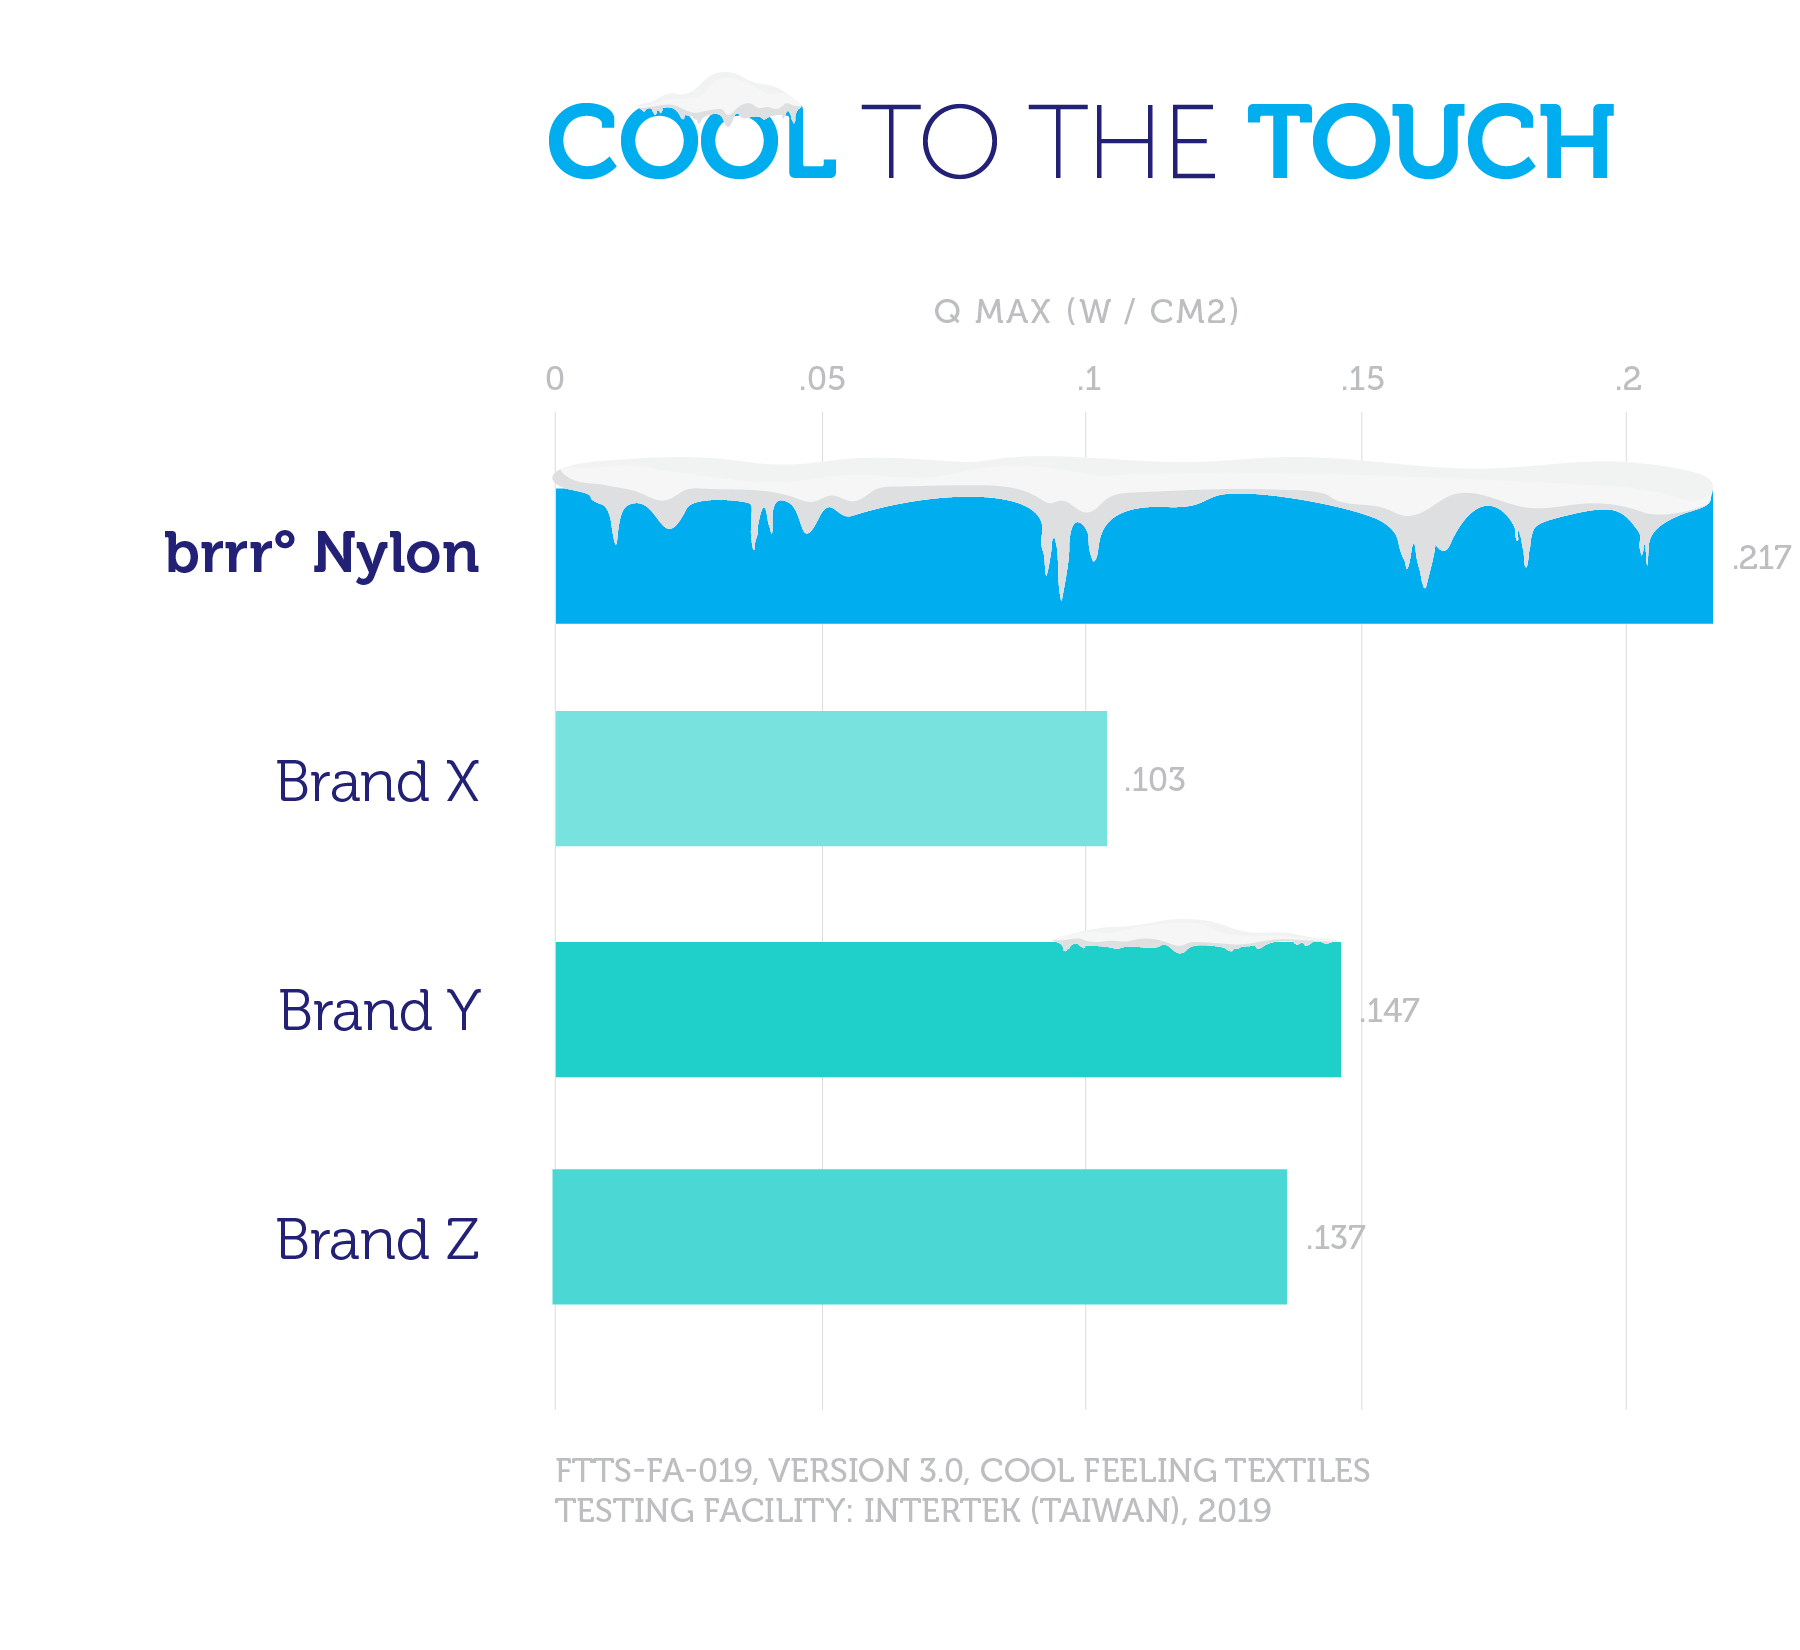 brrr° Nylon Outperforms Competitors in "Cool to the Touch" testing